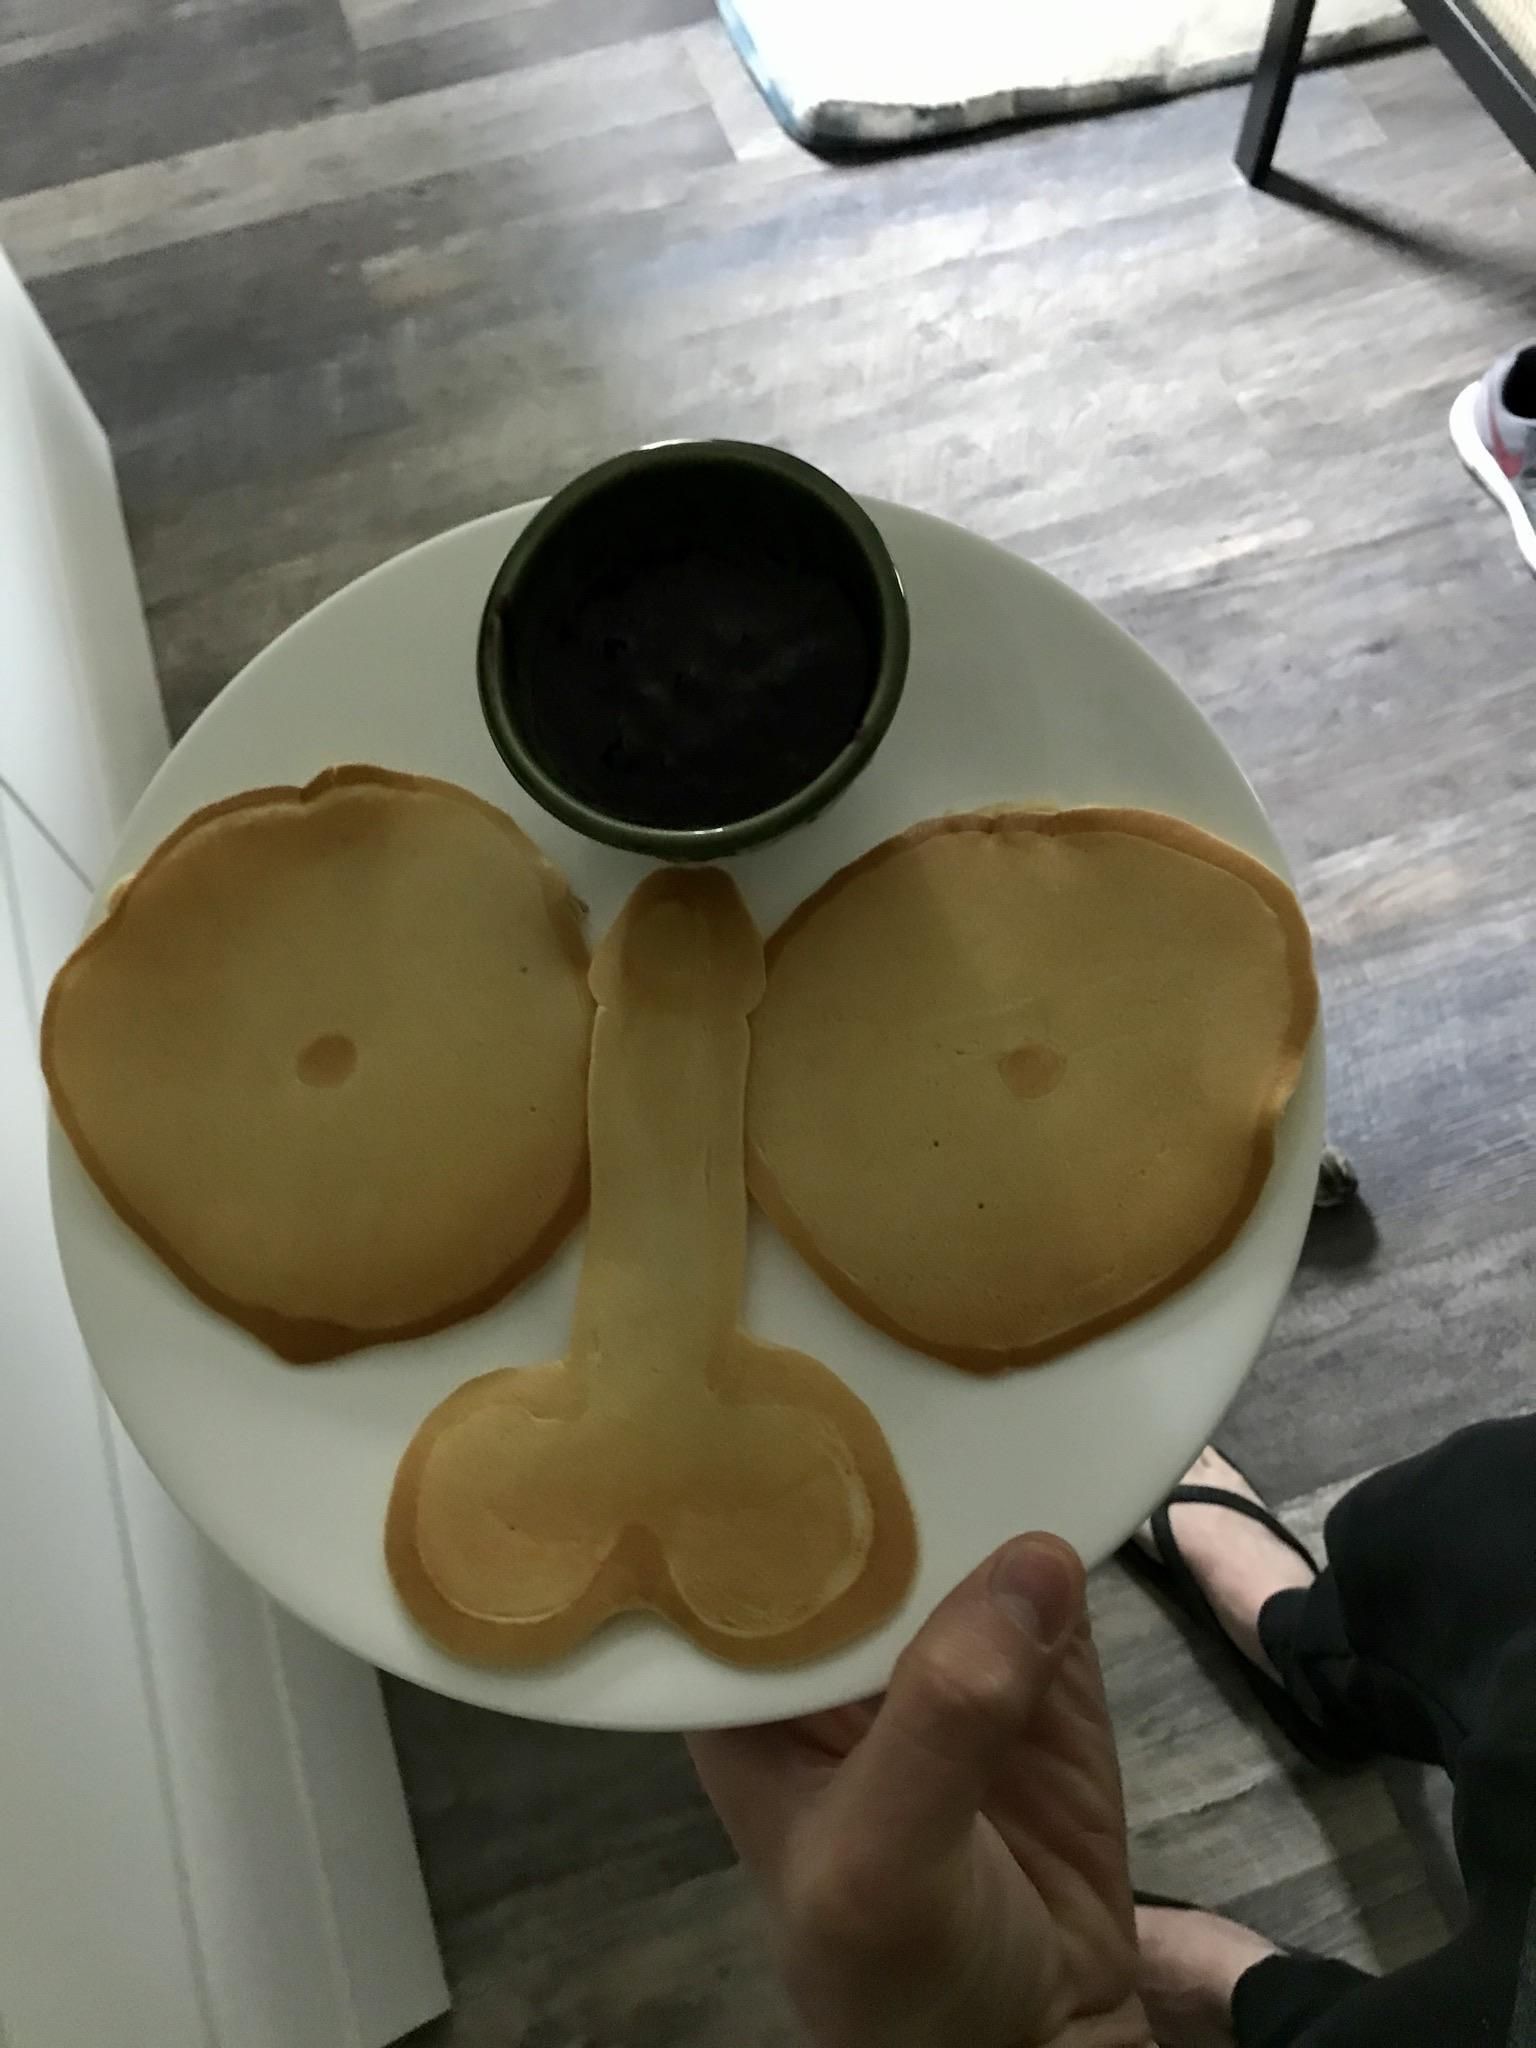 Wife gives a subtle hint in my breakfast...